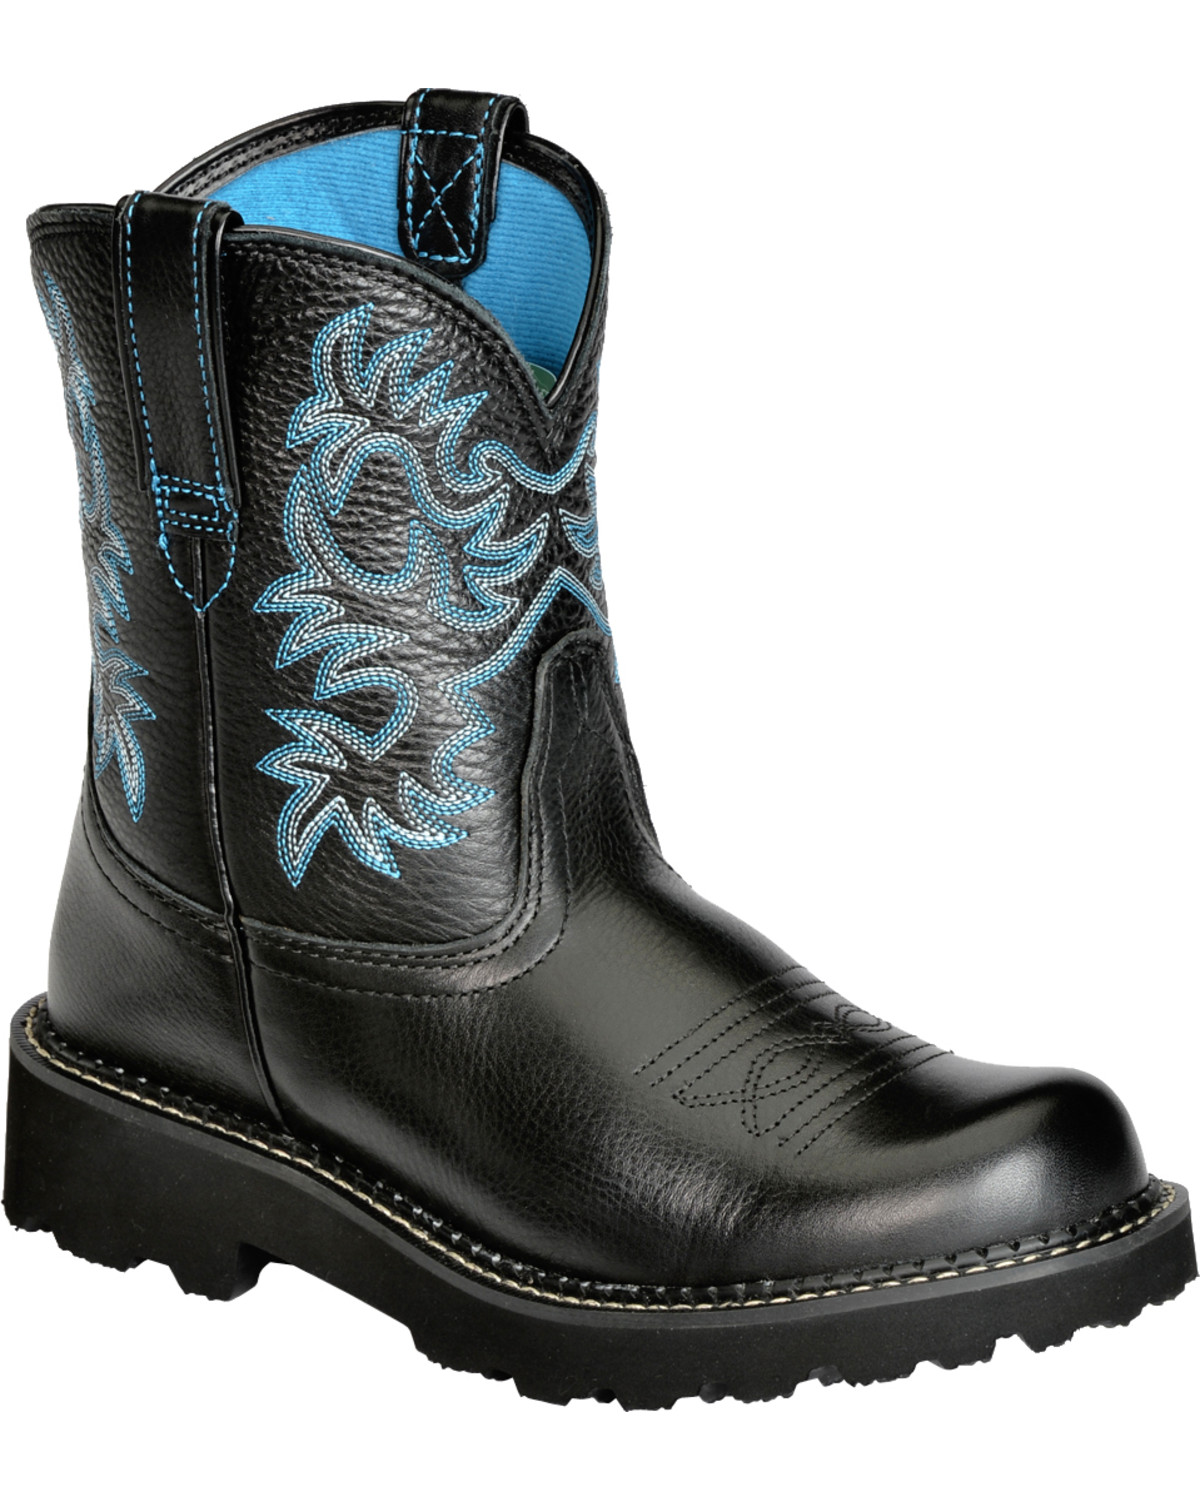 Ariat Women's Fatbaby Western Boots - Round Toe